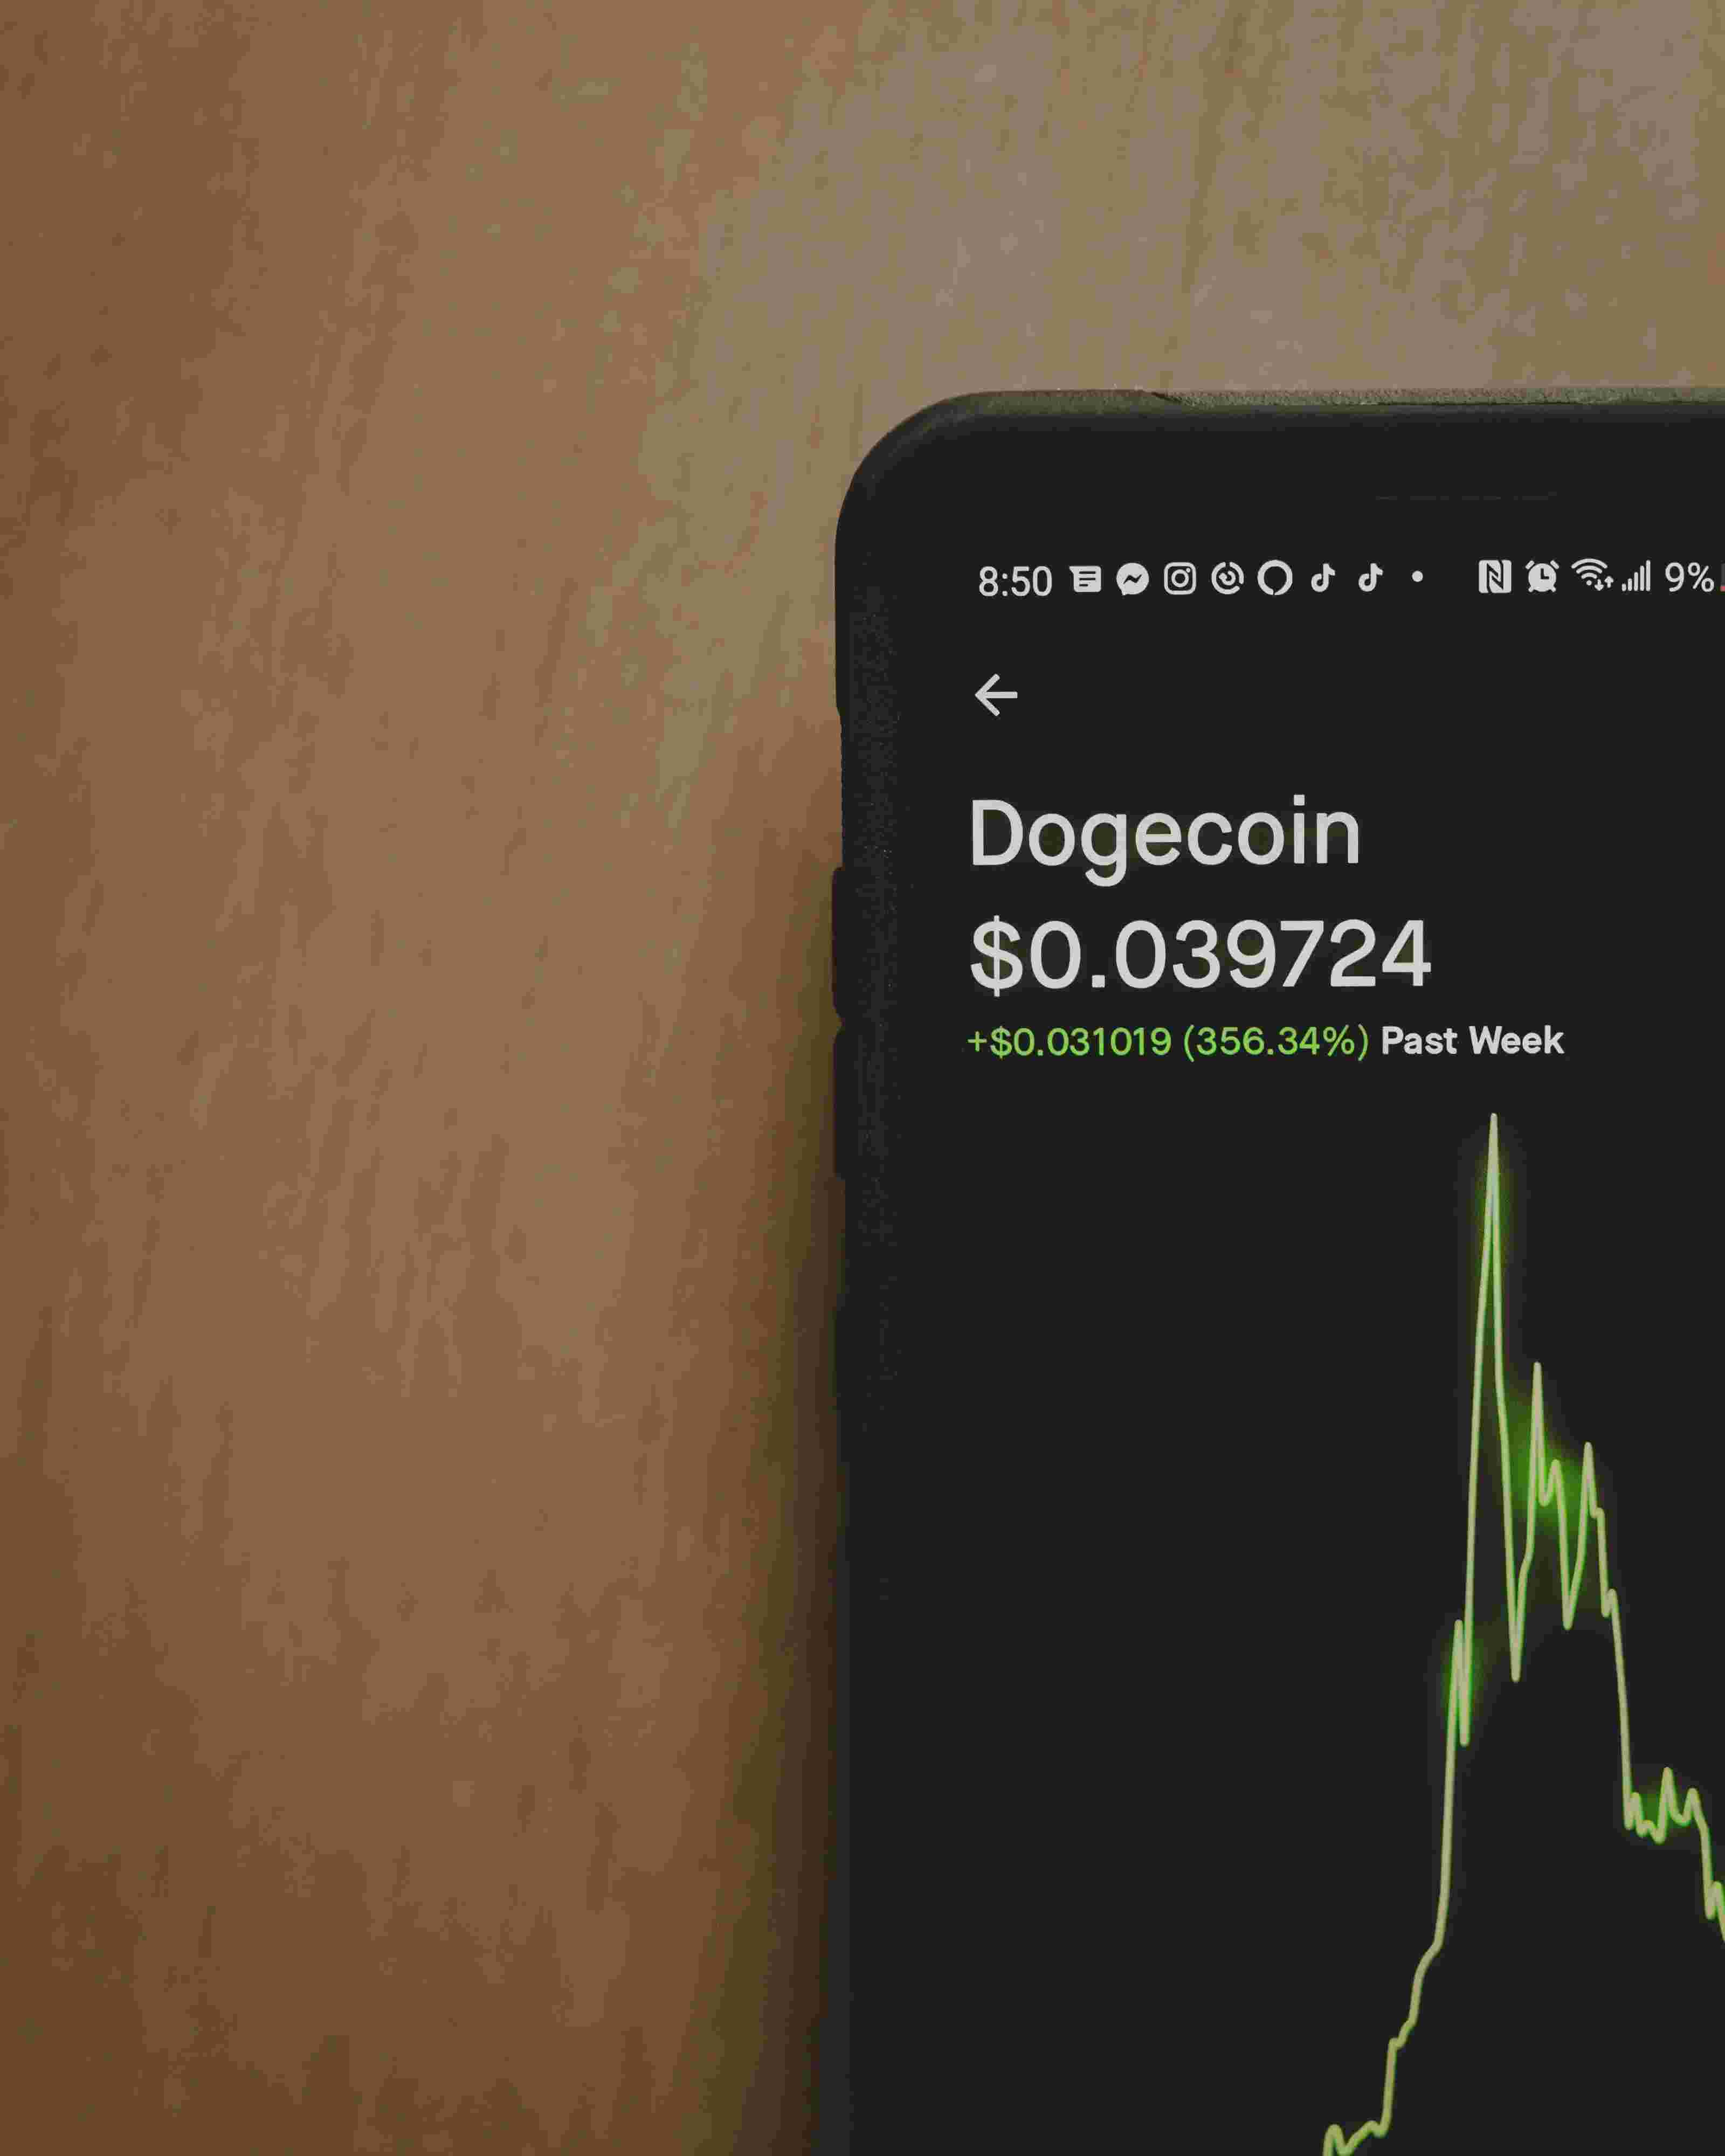 Image displaying Dogecoin's current value and past week's growth of 356.34%. No relevance to self employed, 1099, freelancer or taxes.